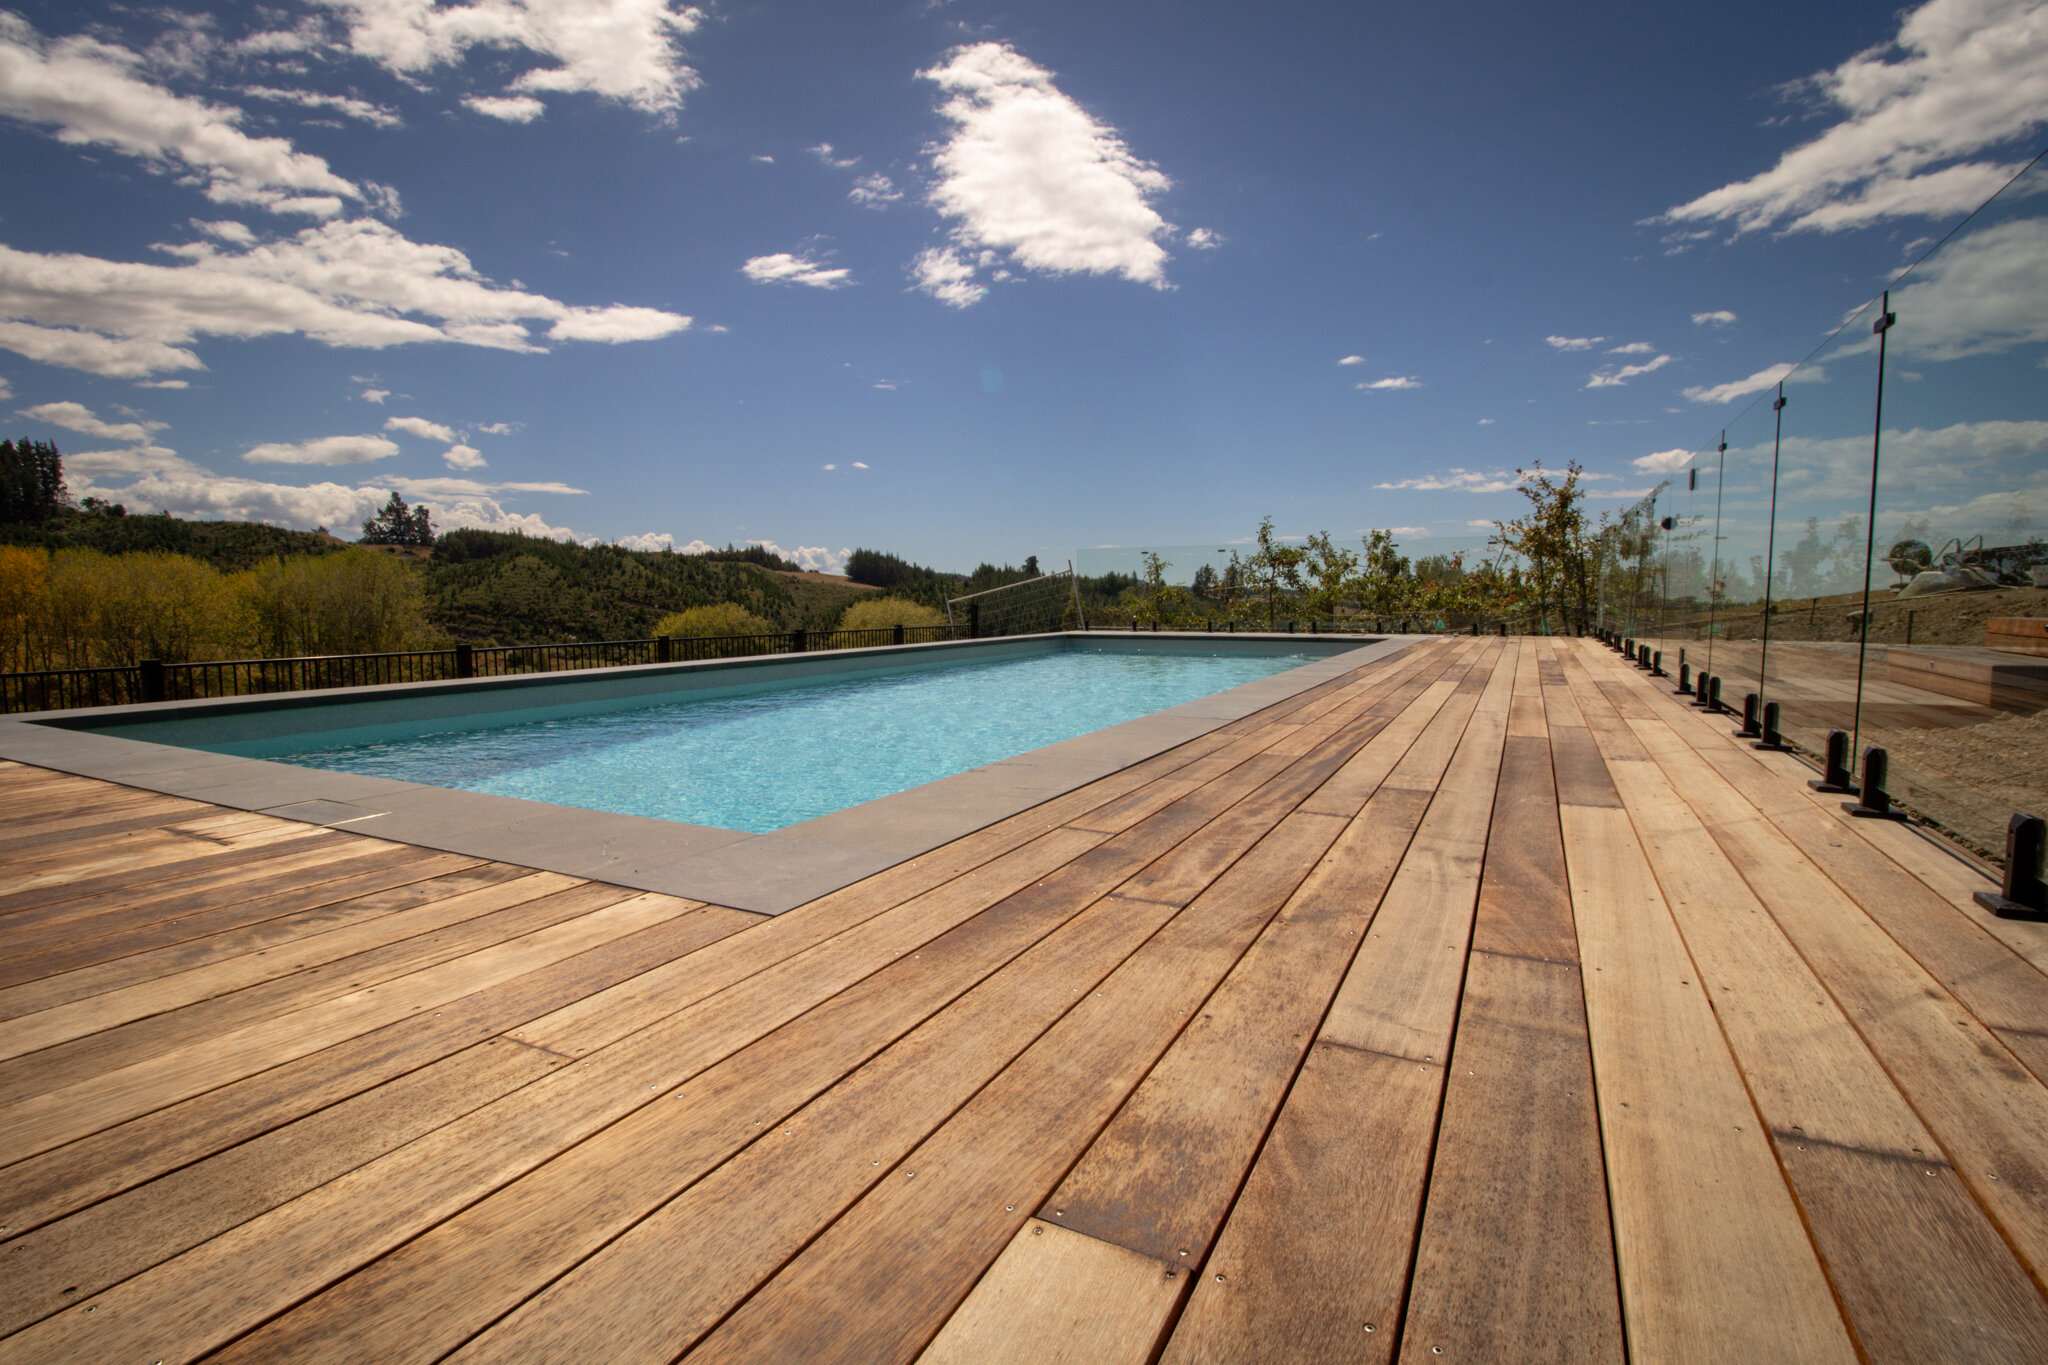 Simply sublime! We love how this Kwila deck around a &quot;Torino&quot; is weaving itself into the stunning back drop of Redwood Valley. 🤩

#nvp #nvpools #newvisionlandscapes #nvl #landscapearchitecture #landscapedesign #nvdesign #teamawesome #teamn